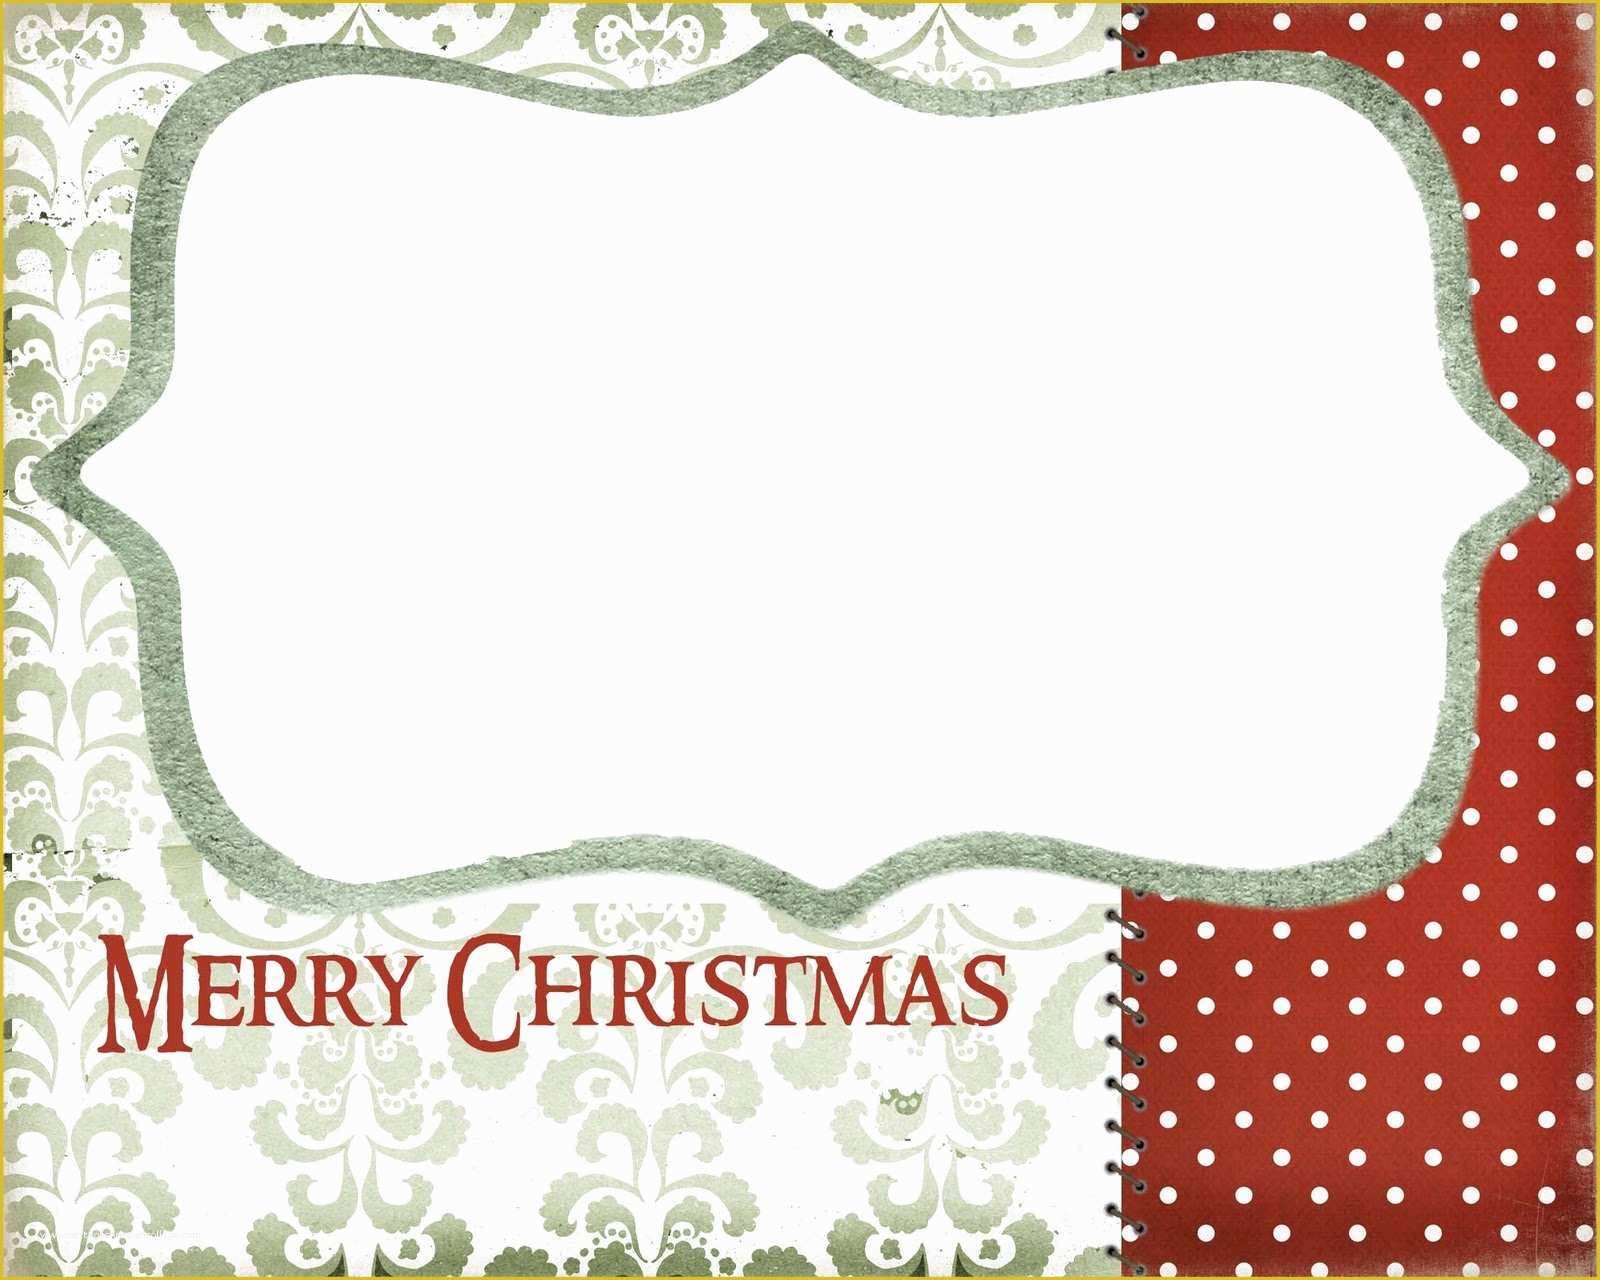 Free Photo Christmas Card Templates Of Christmas Card Display 5 Printable Christmas Cards